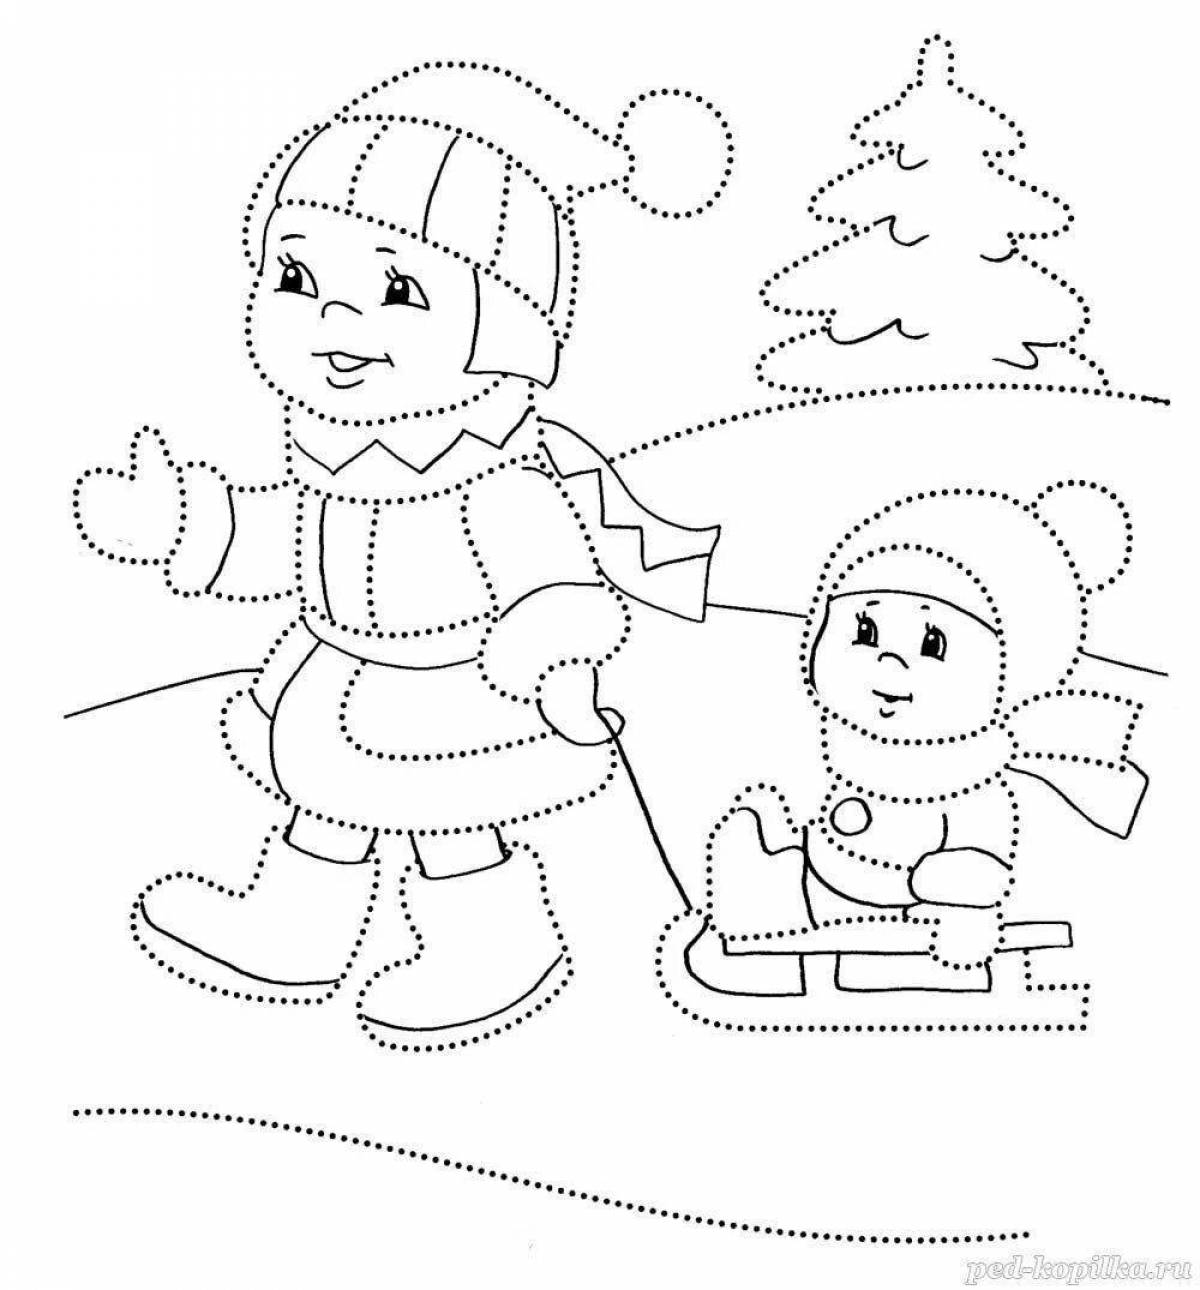 Joyful winter coloring for children 2-3 years old